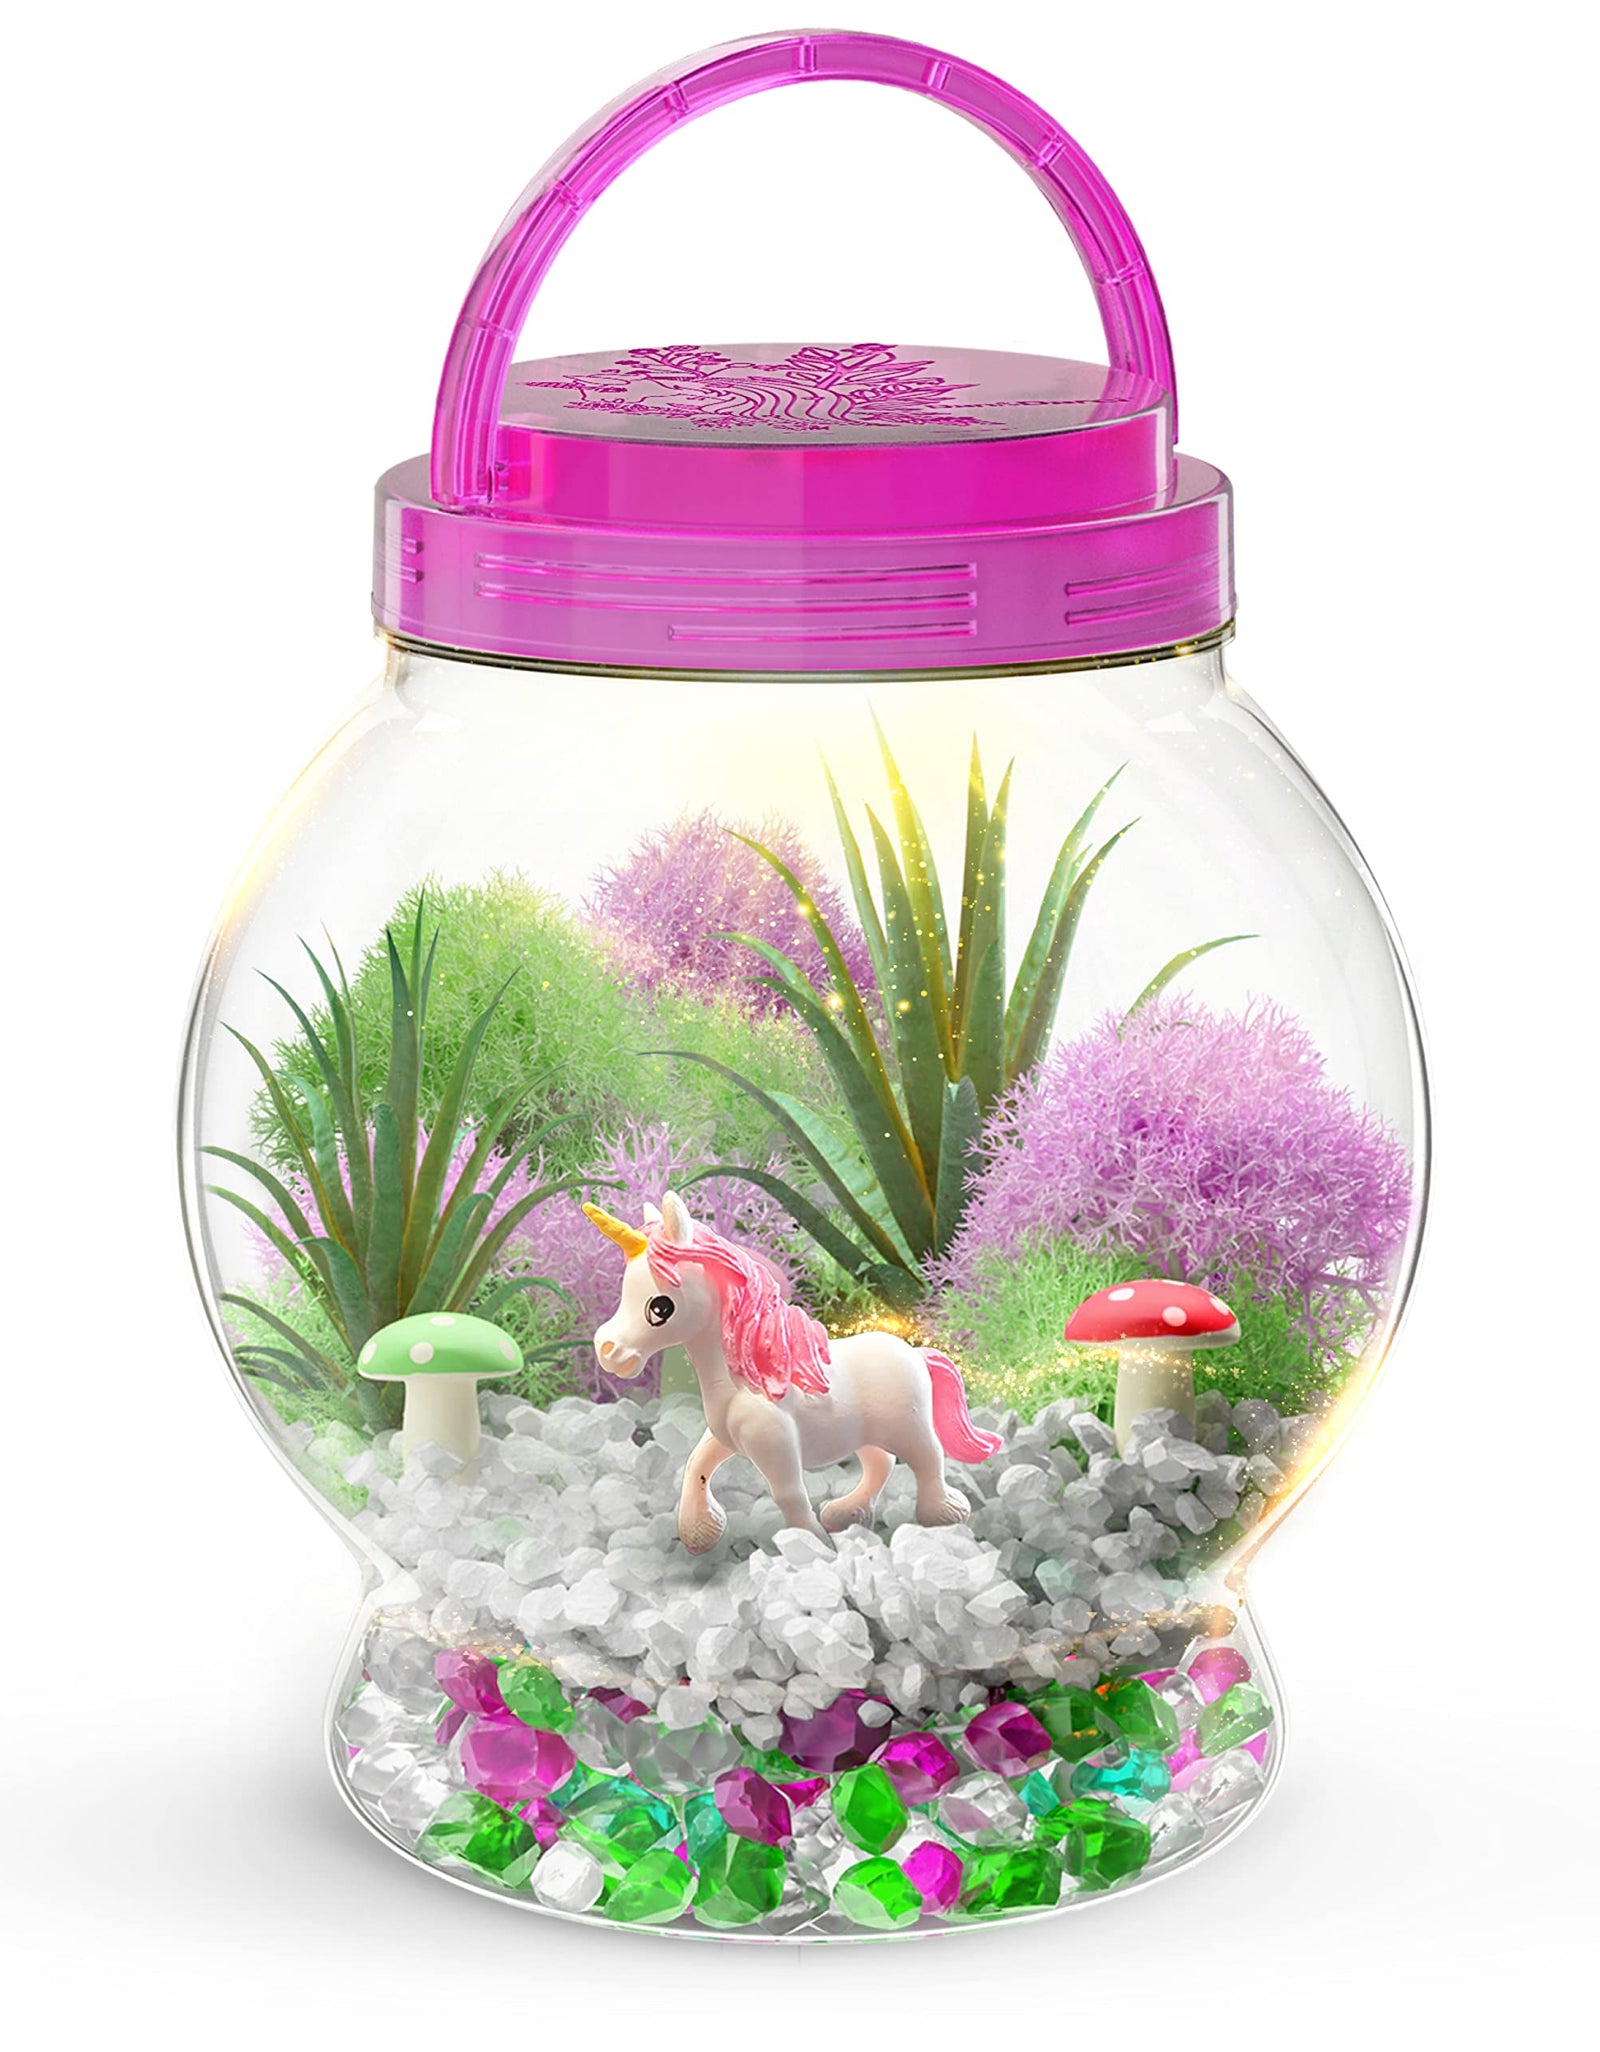 Light-Up Unicorn Terrarium Kit for Kids - Kids Birthday Gifts for Kids - Best Unicorn Toys & Activities Kits Presents - Arts & Crafts Stuff for Little Girls & Boys Age 4 5 6 7 8-12 Year Old Girl Gift